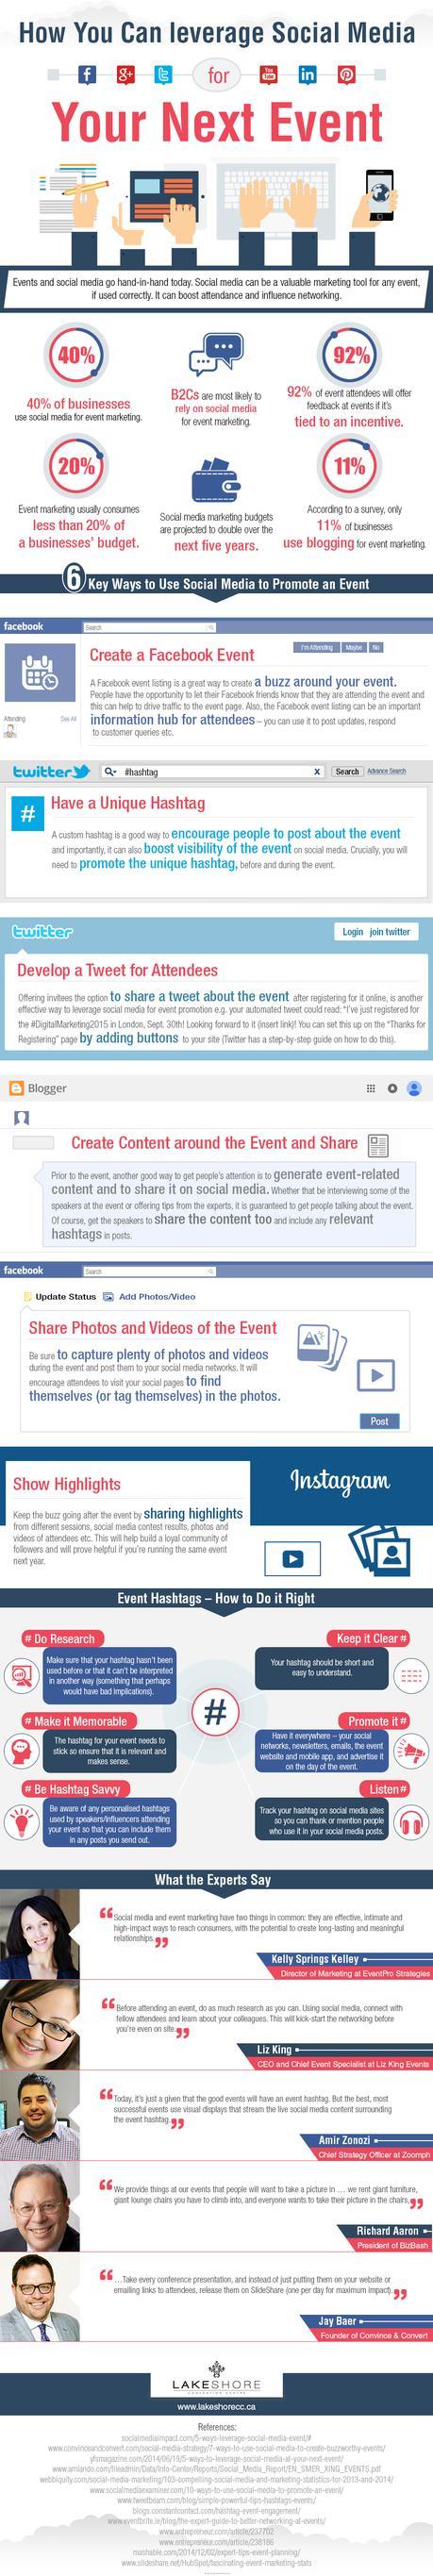 how-to-leverage-social-media-for-your-next-event-infographic (1)